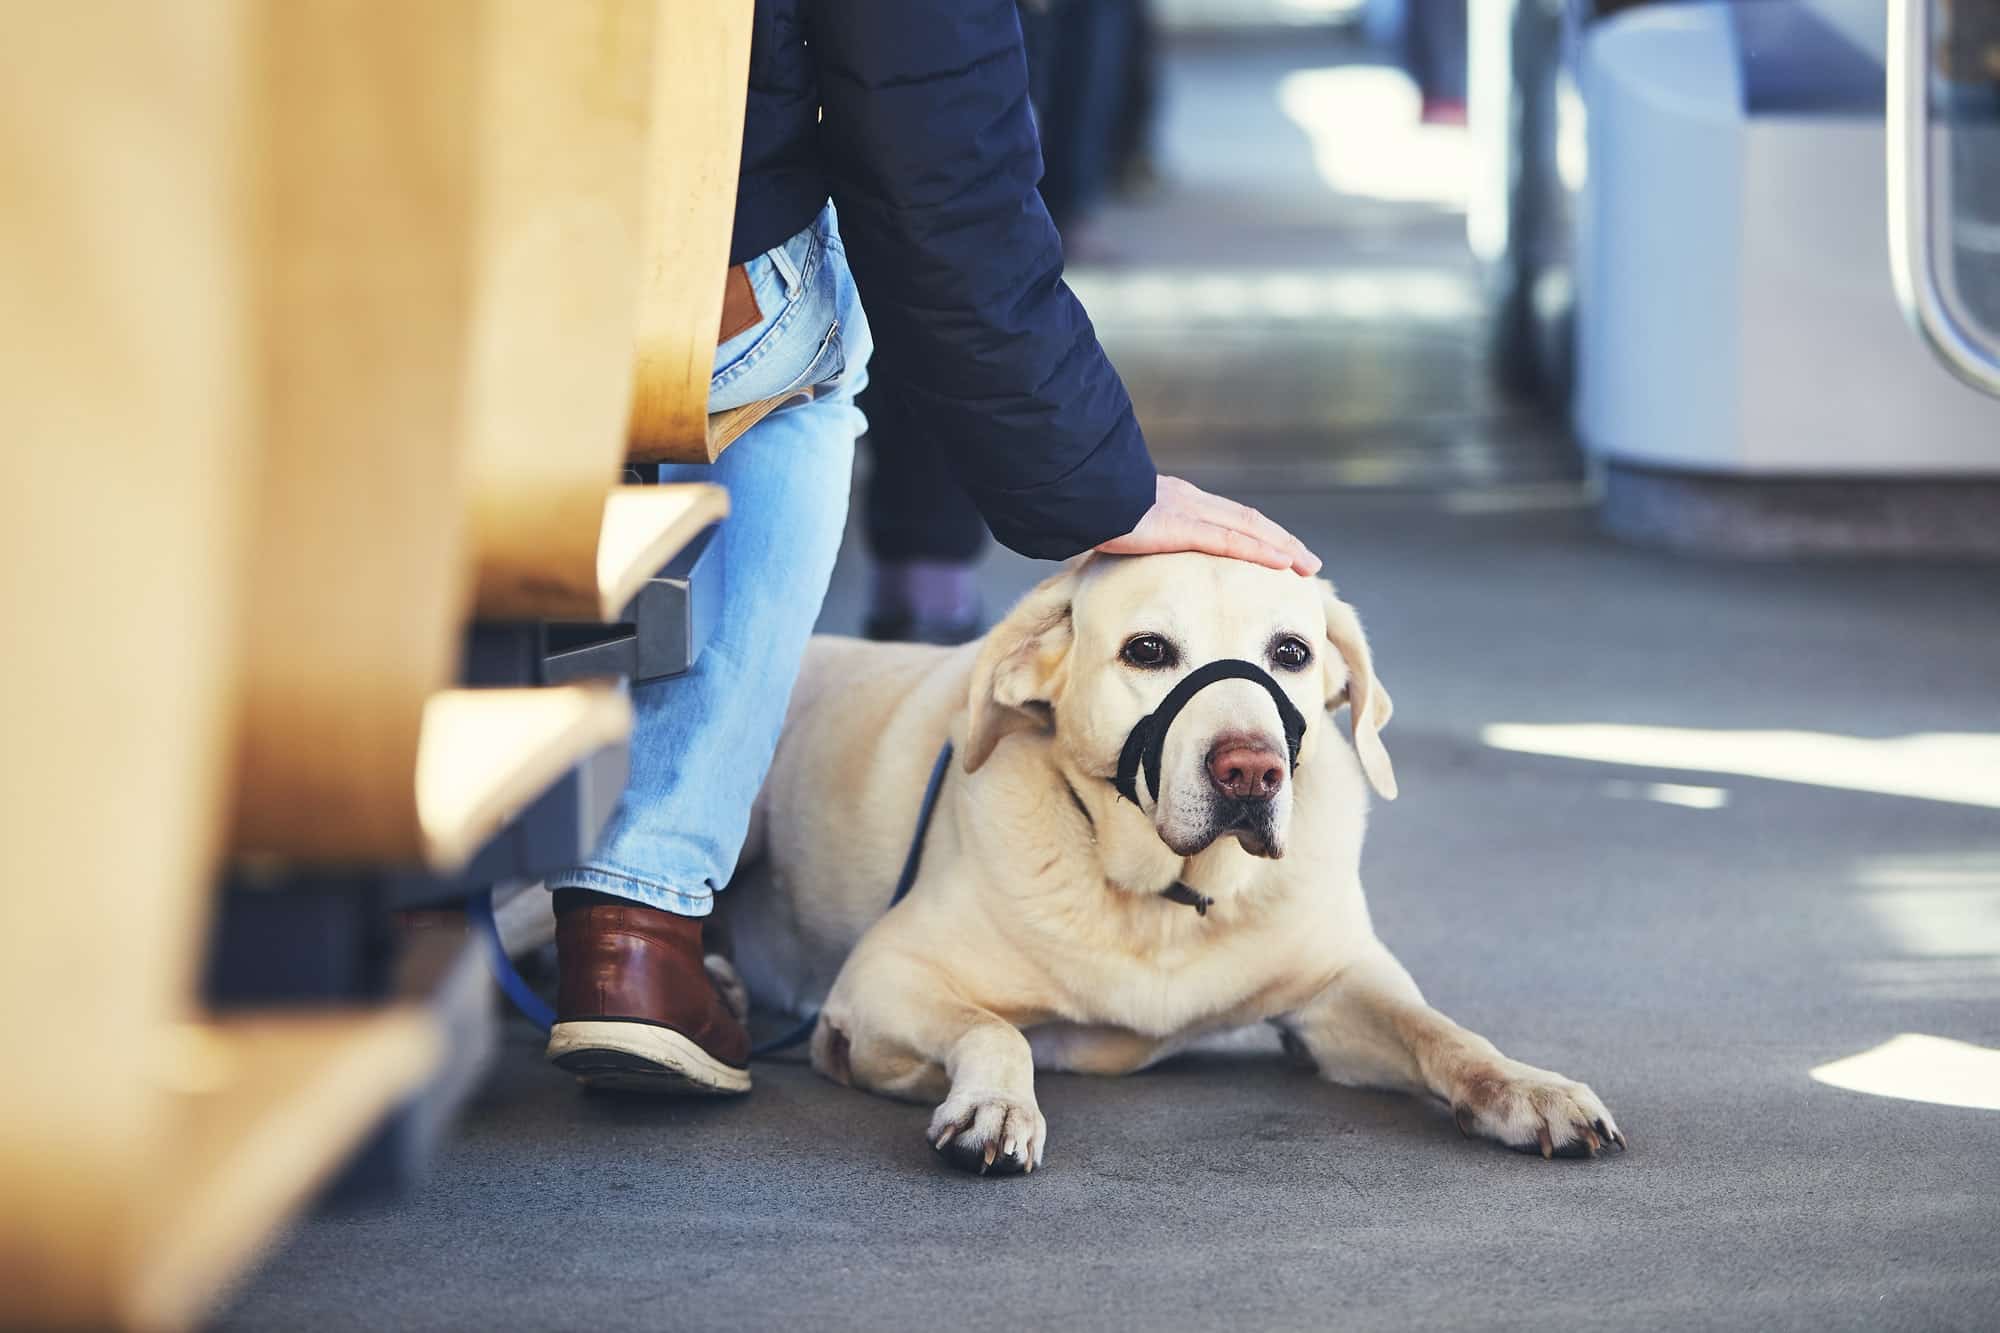 Travel with dog by public transportation